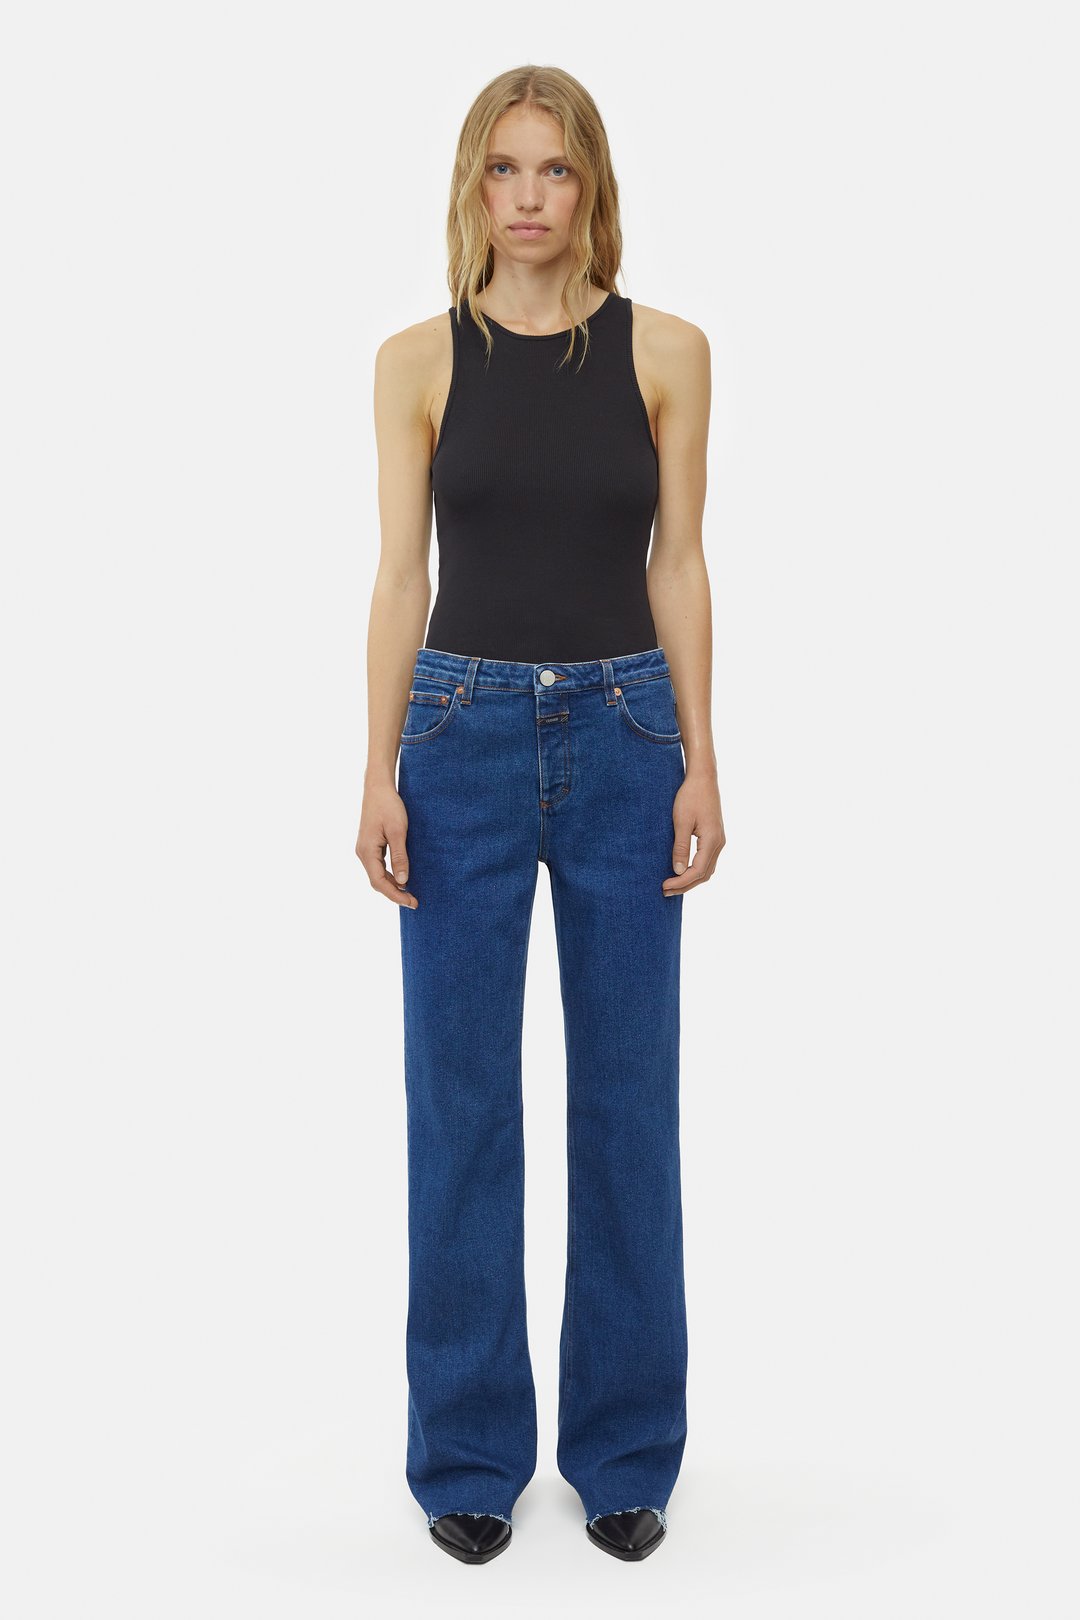 SLIM JEANS - STYLE NAME GILLAN | CLOSED